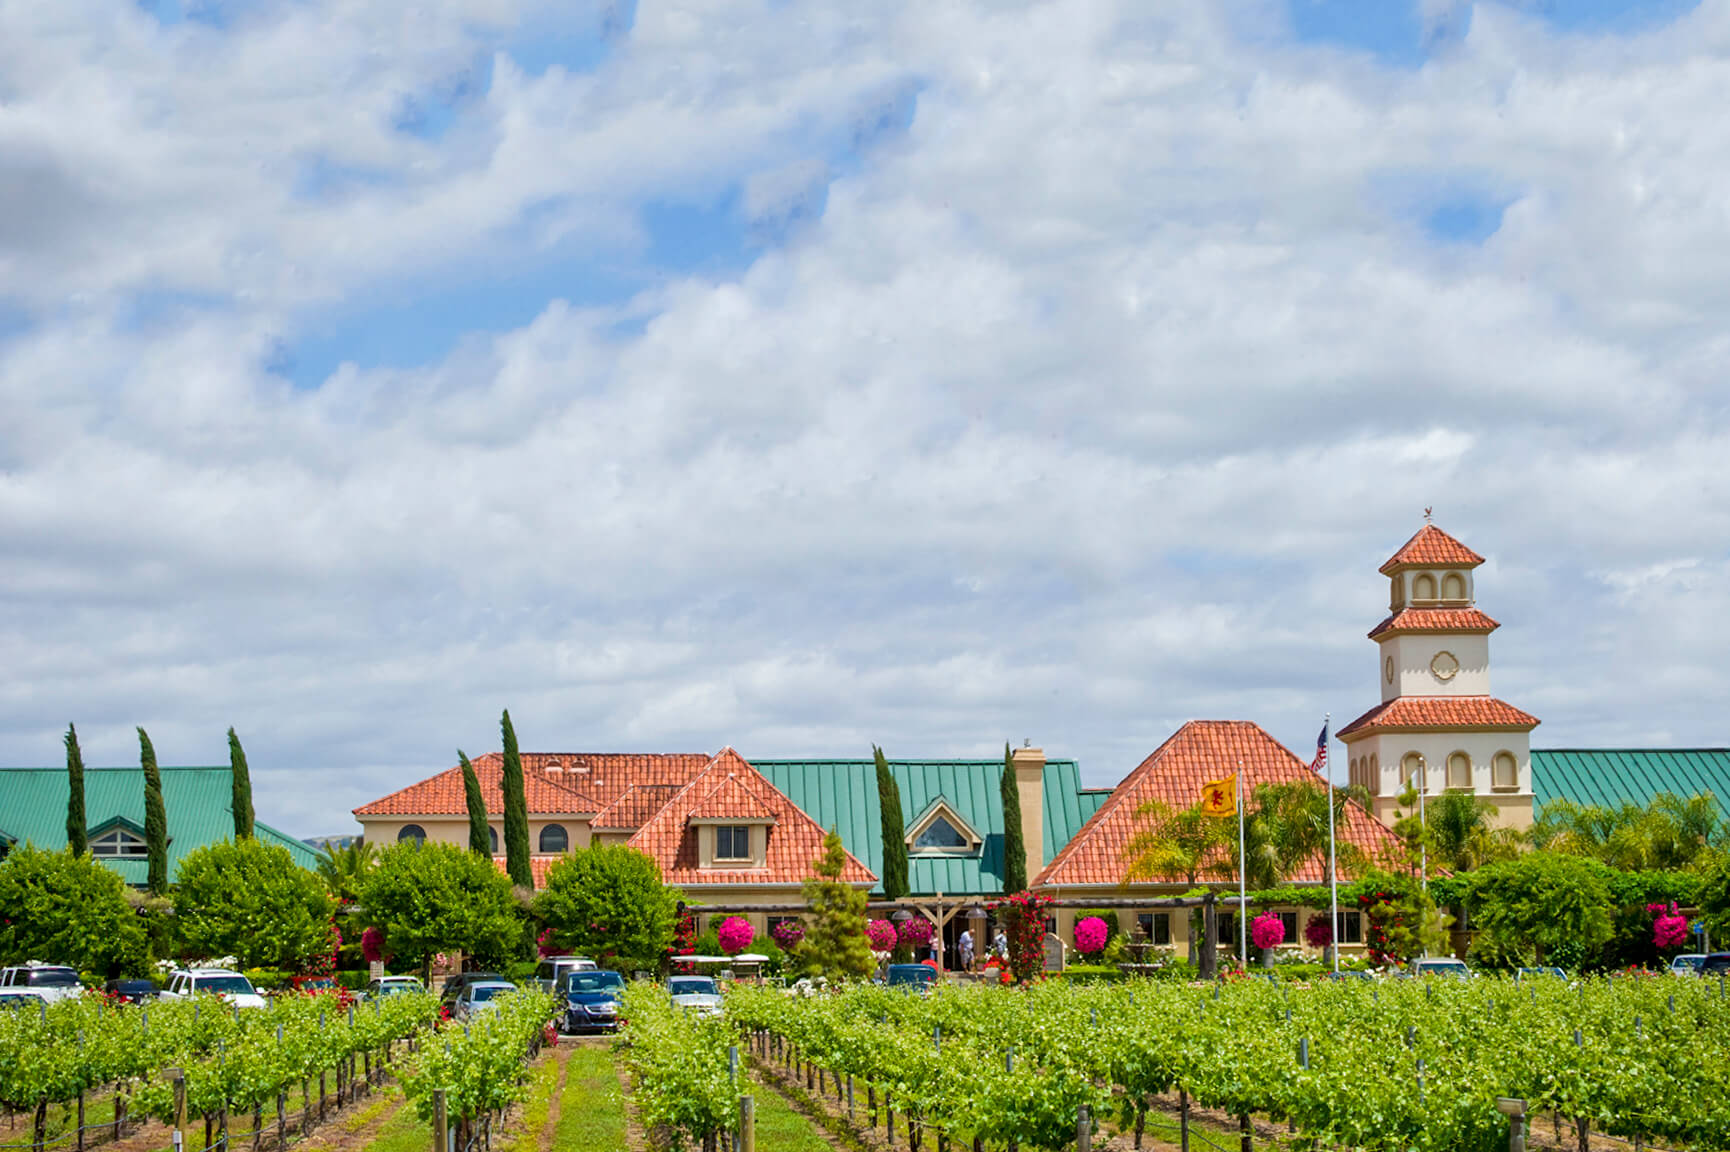 Stay at South Coast Winery for a Complete Wine Country Experience